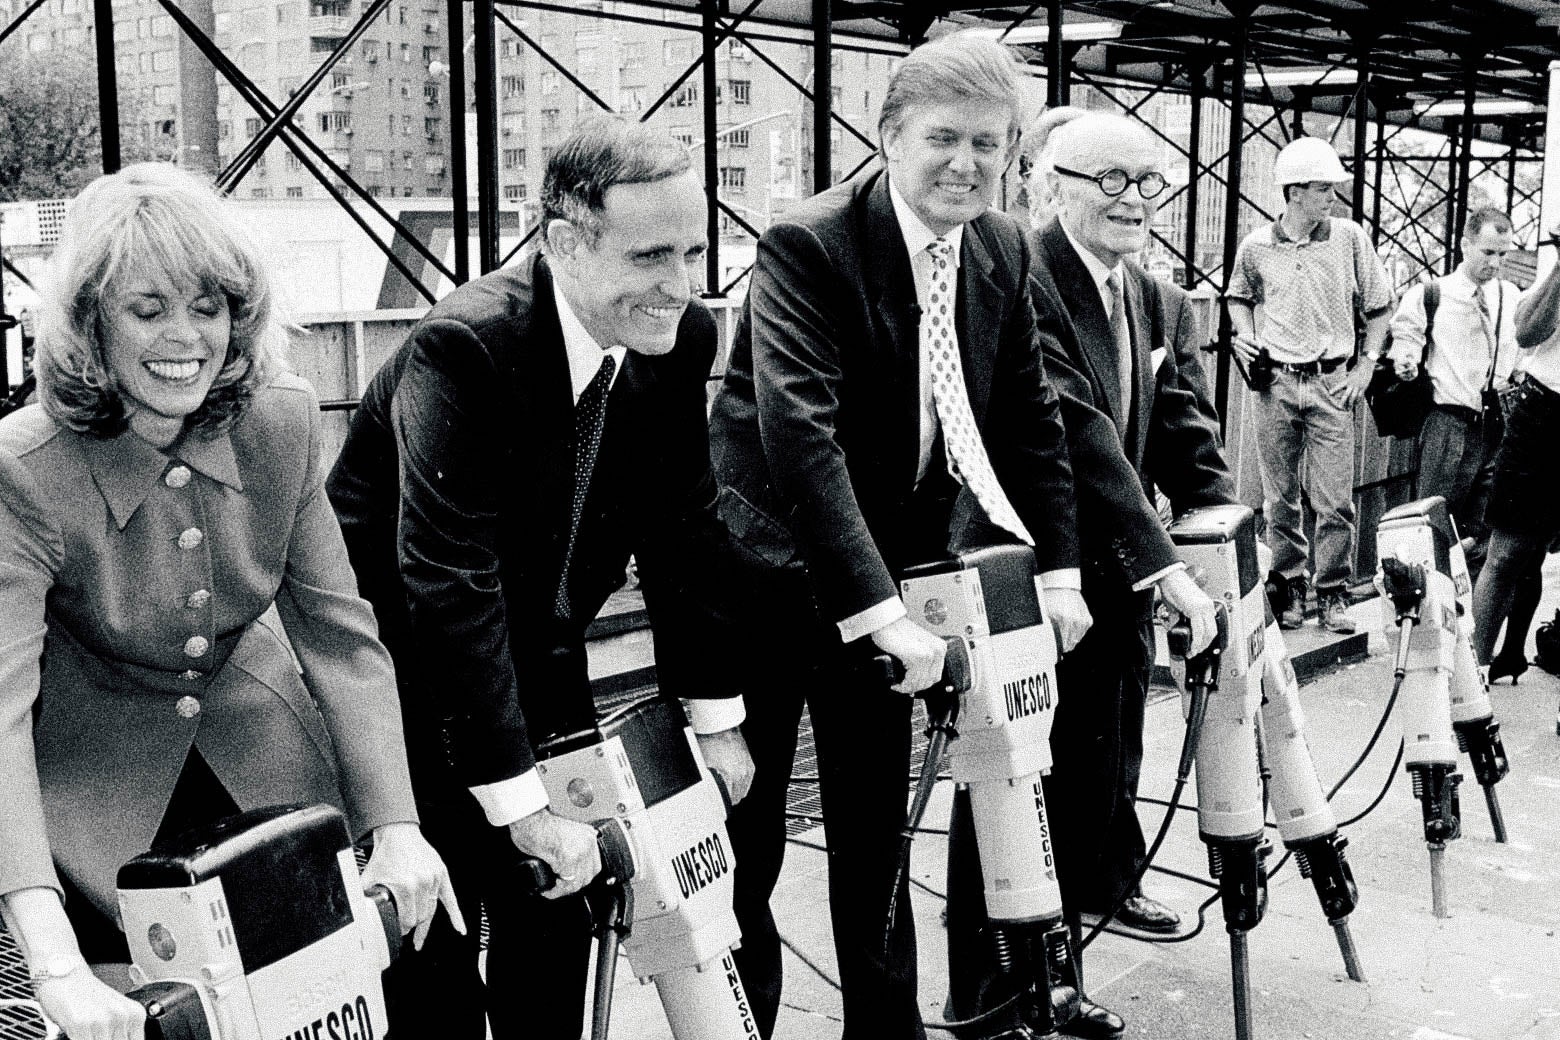 Giuliani, Trump, and others pose, holding jackhammers